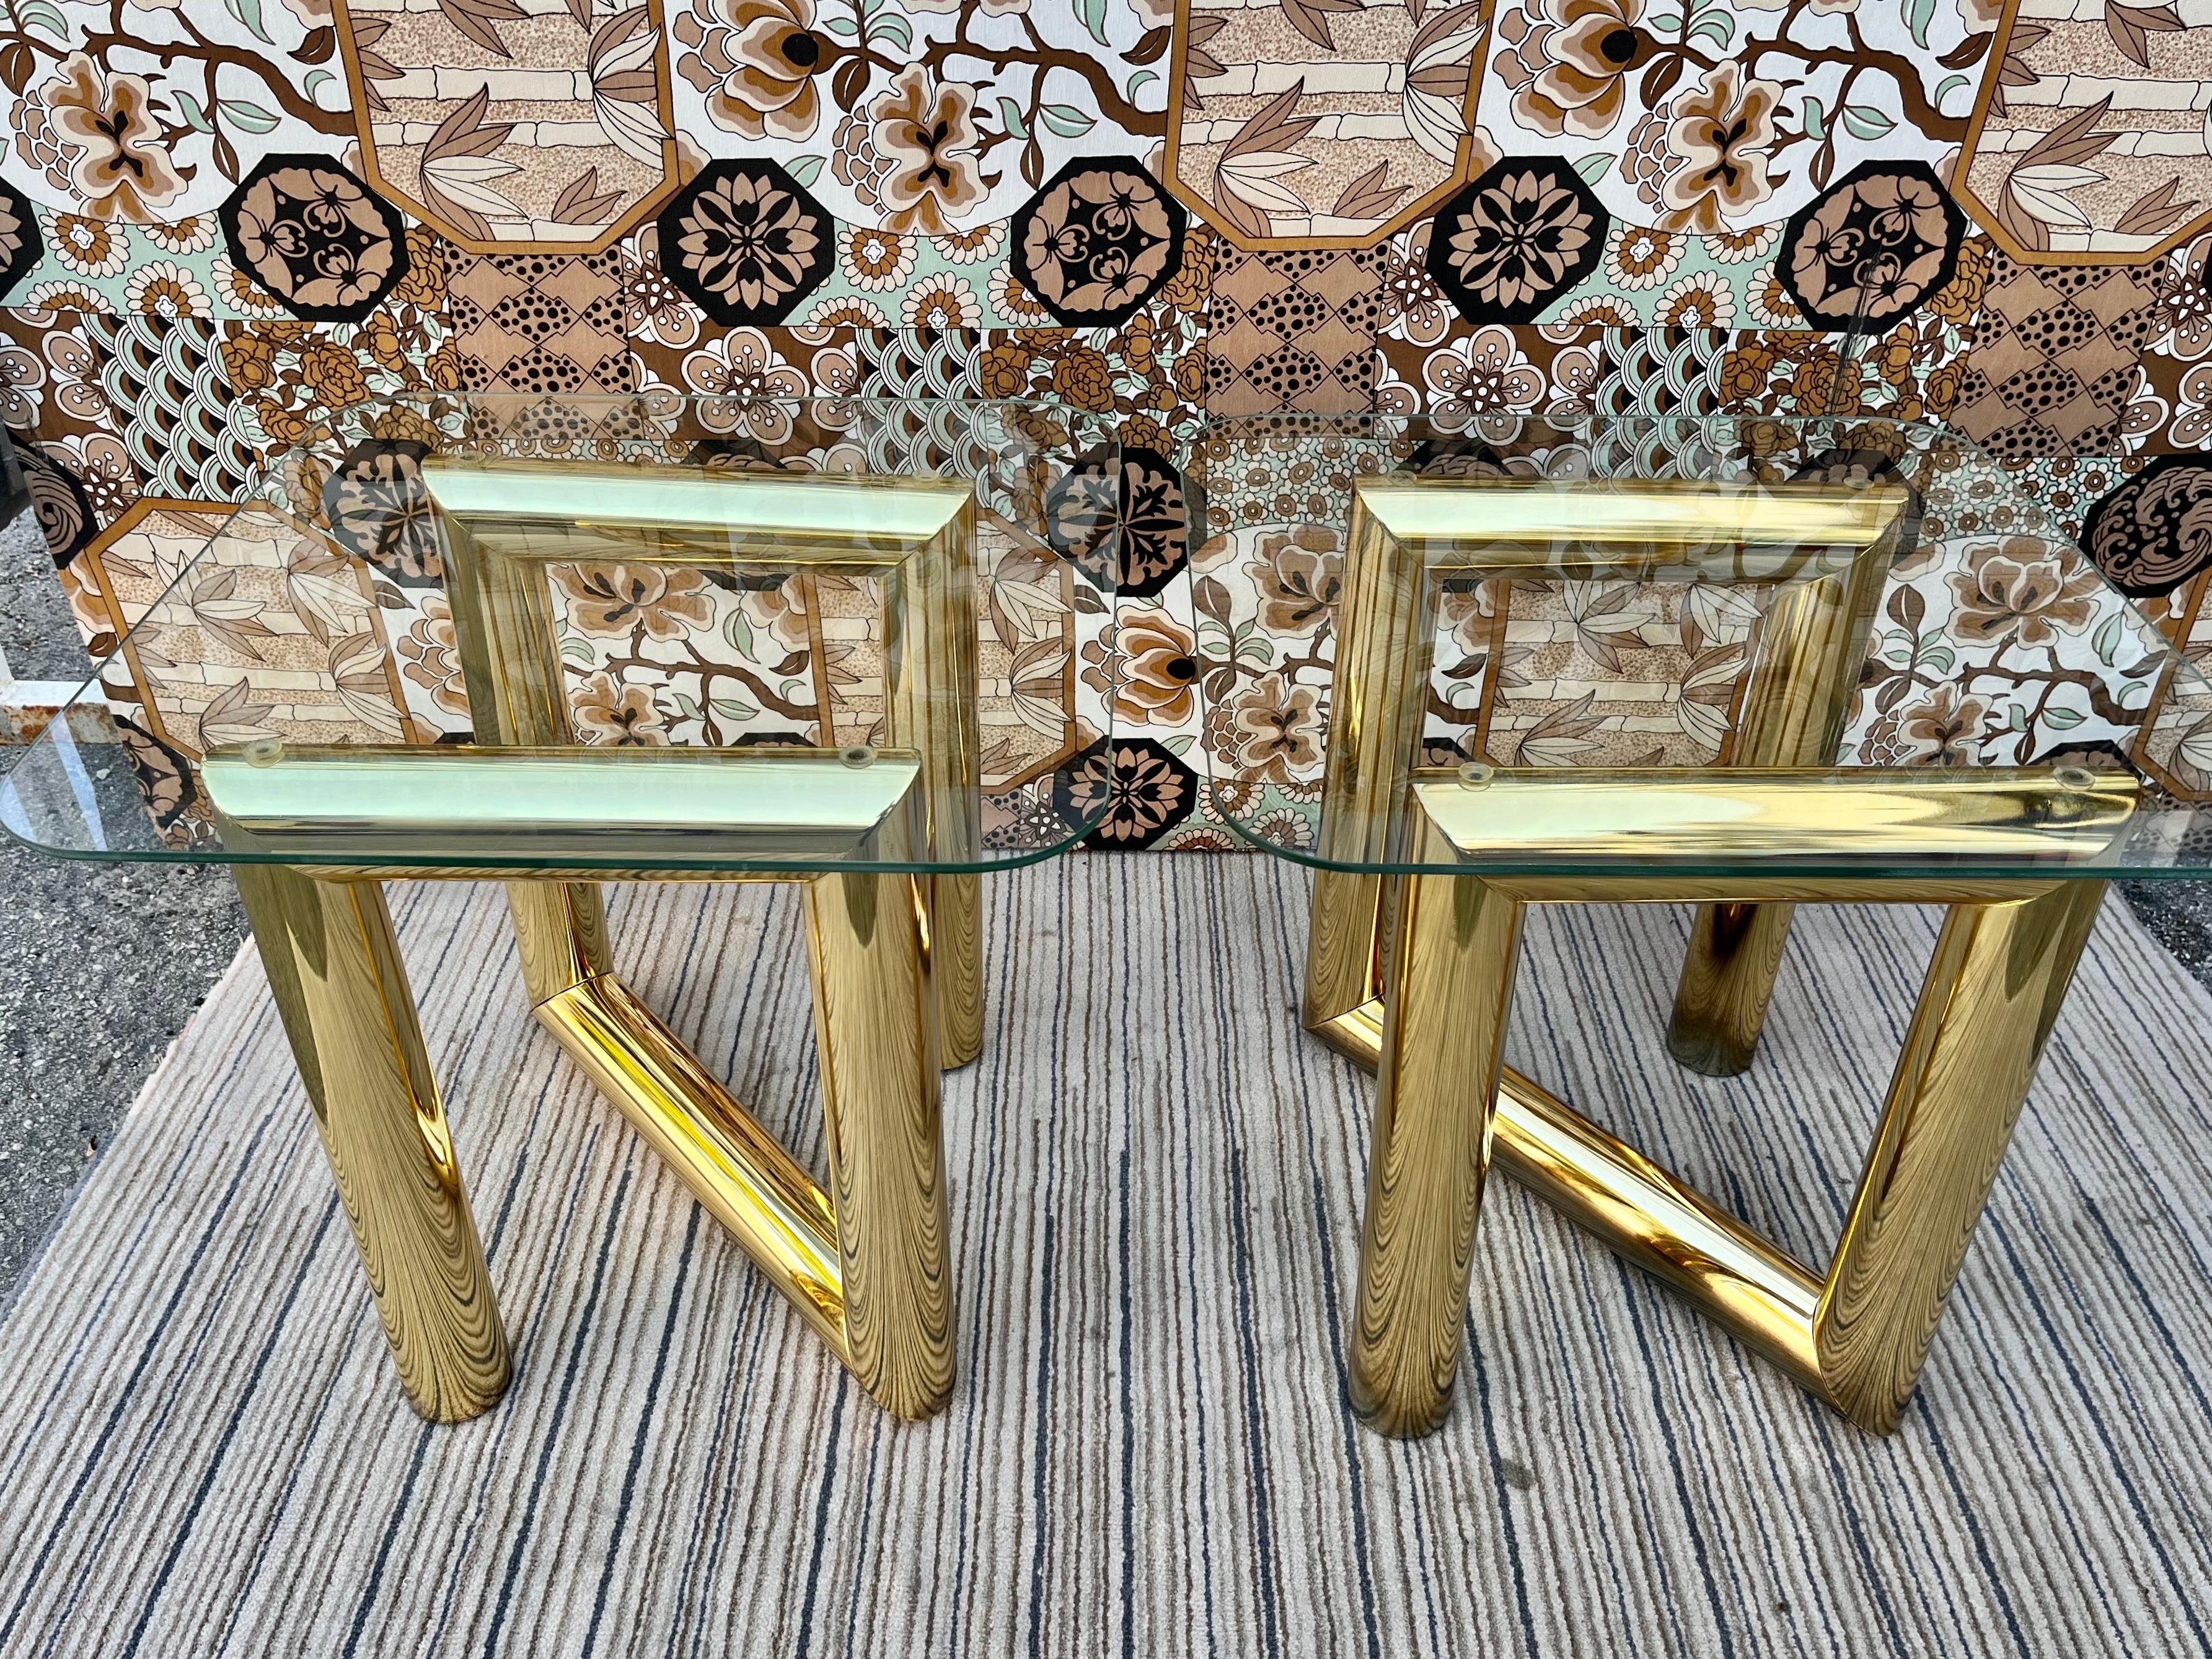 A pair of Vintage Mid-Century Modern brass z tables with glass top in the Karl Springer's Style. Circa 1970s
Feature about 3 inches Z shaped tubular brass plated bases with removable square glass tops with rounded edges.
In good original cosmetic